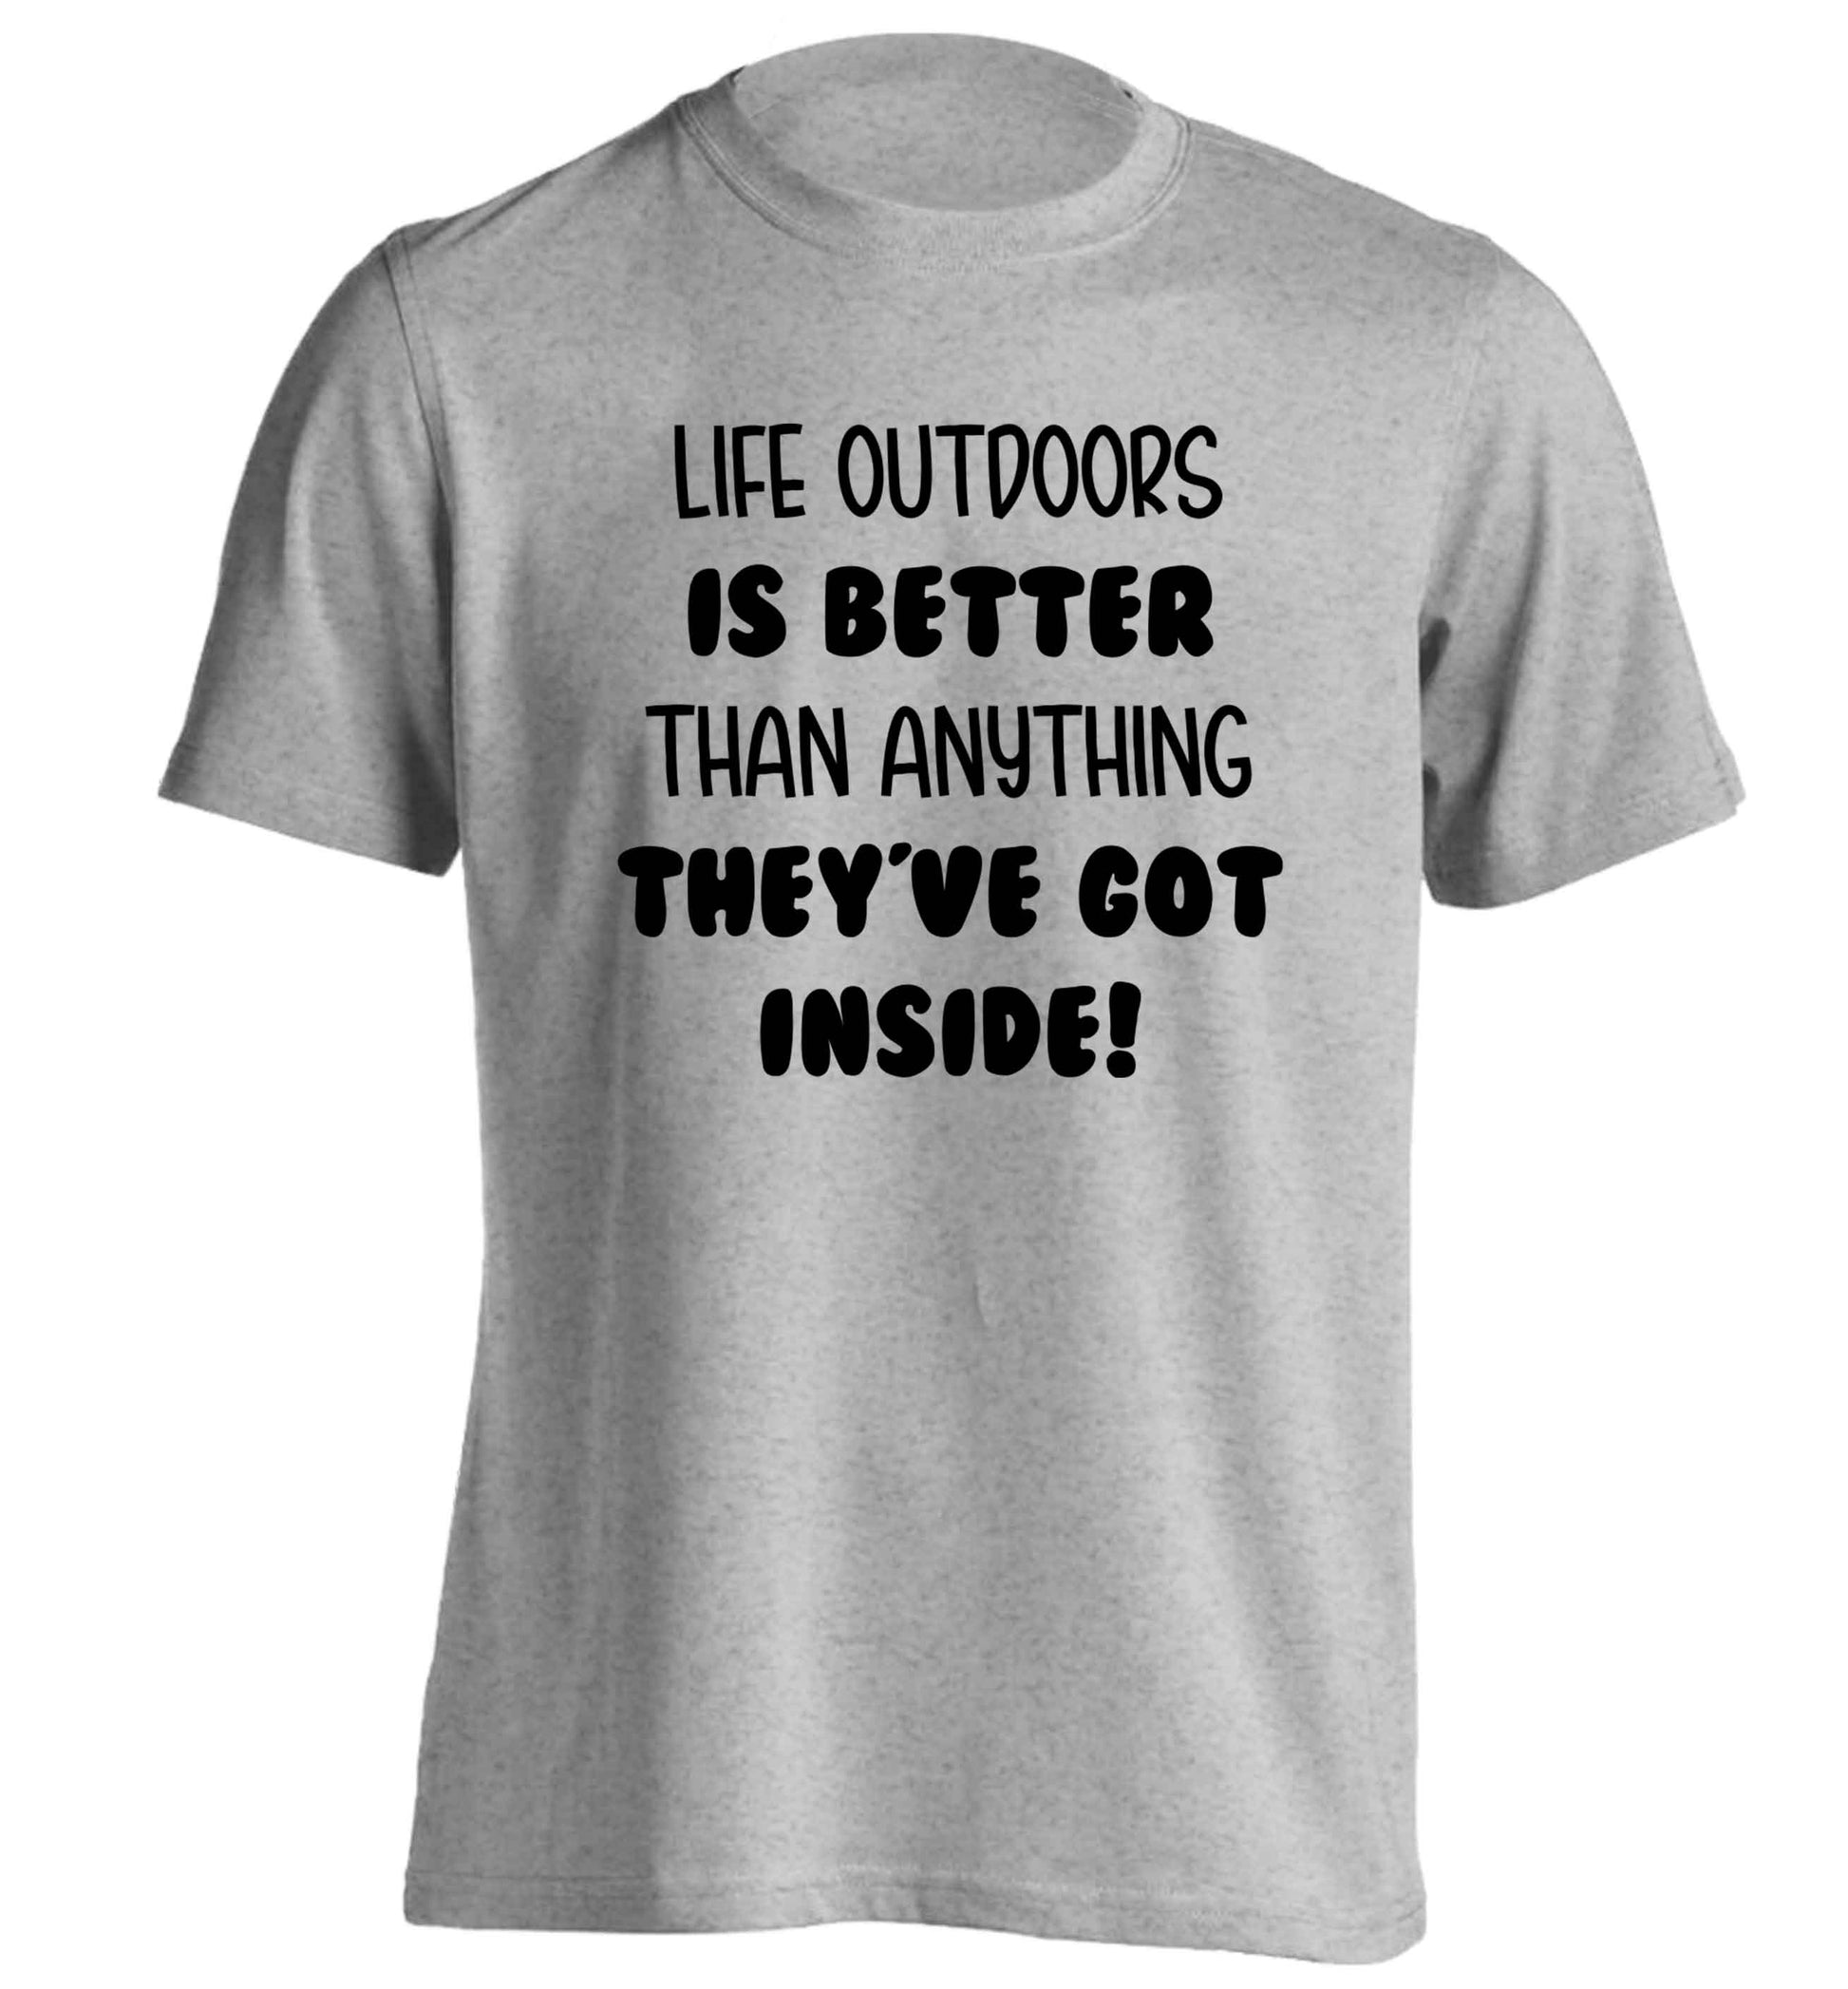 Life outdoors is better than anything they've go inside adults unisex grey Tshirt 2XL